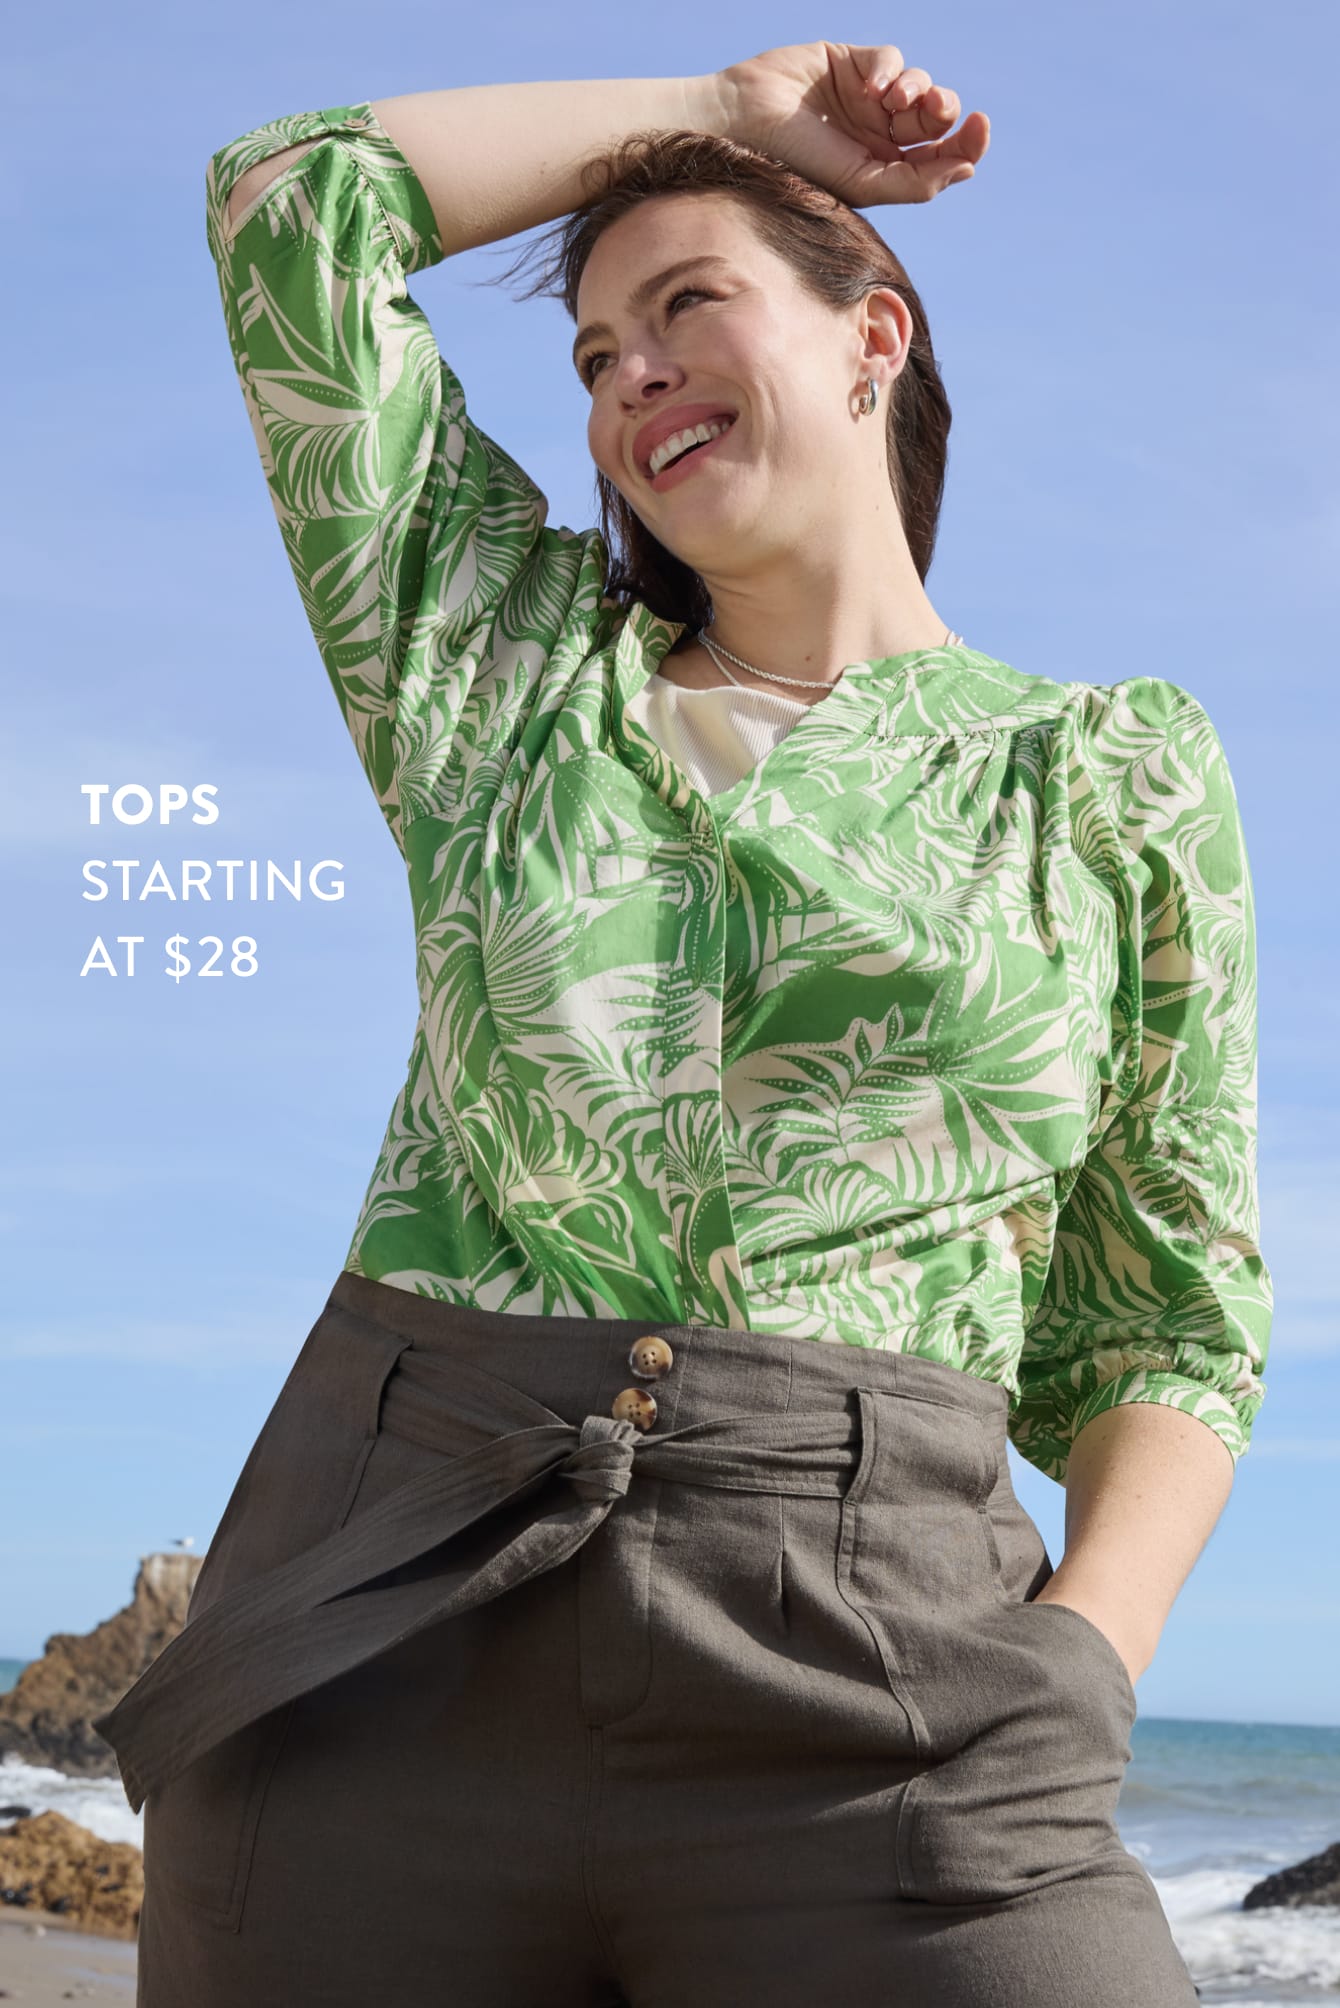 Tops starting at $28. Woman on beach wearing printed Stitch Fix top and wide-leg pants